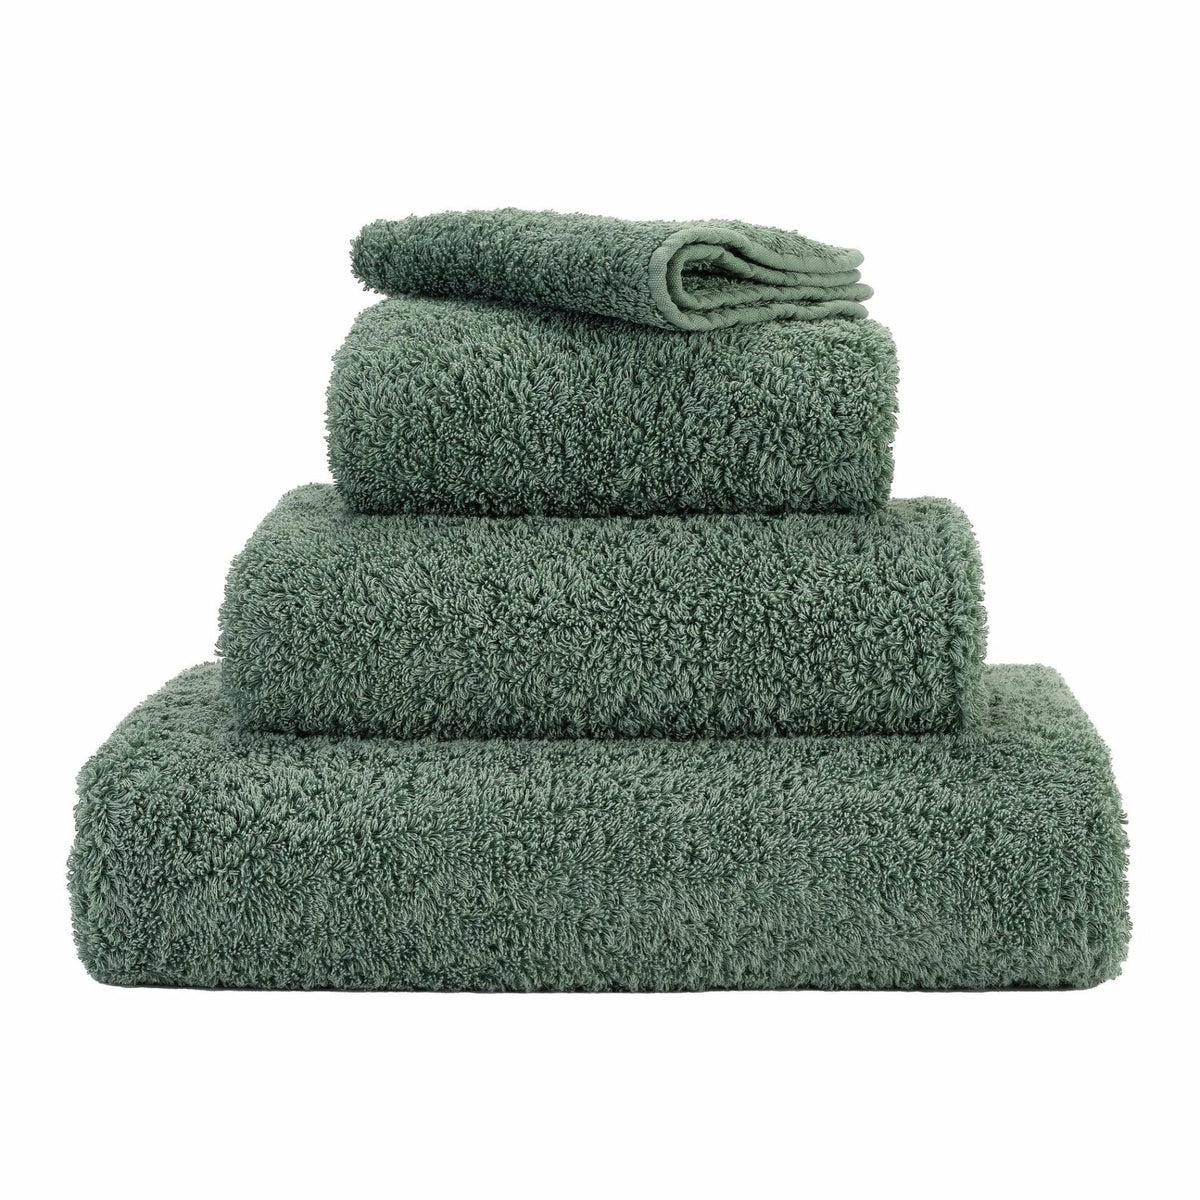 Extra quality linen towel in waffle_ body linen towels_ absorbent bath –  Green Textile Gallery